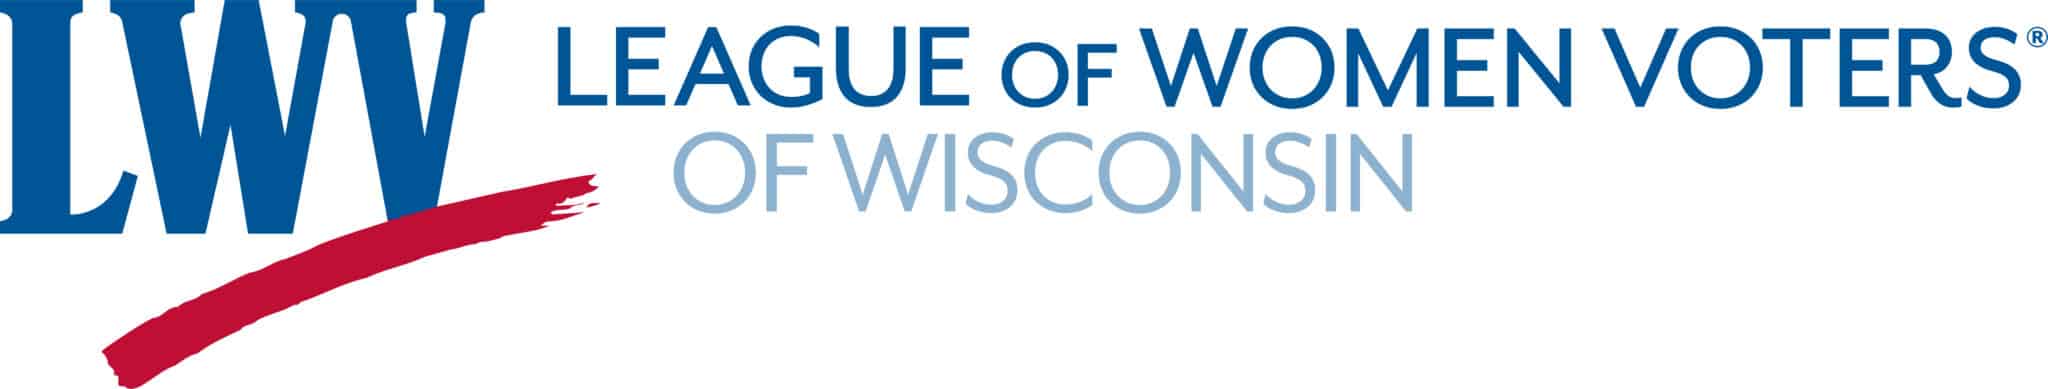 League of Women Voters of Wisconsin launches Spring Election VOTE411 guide